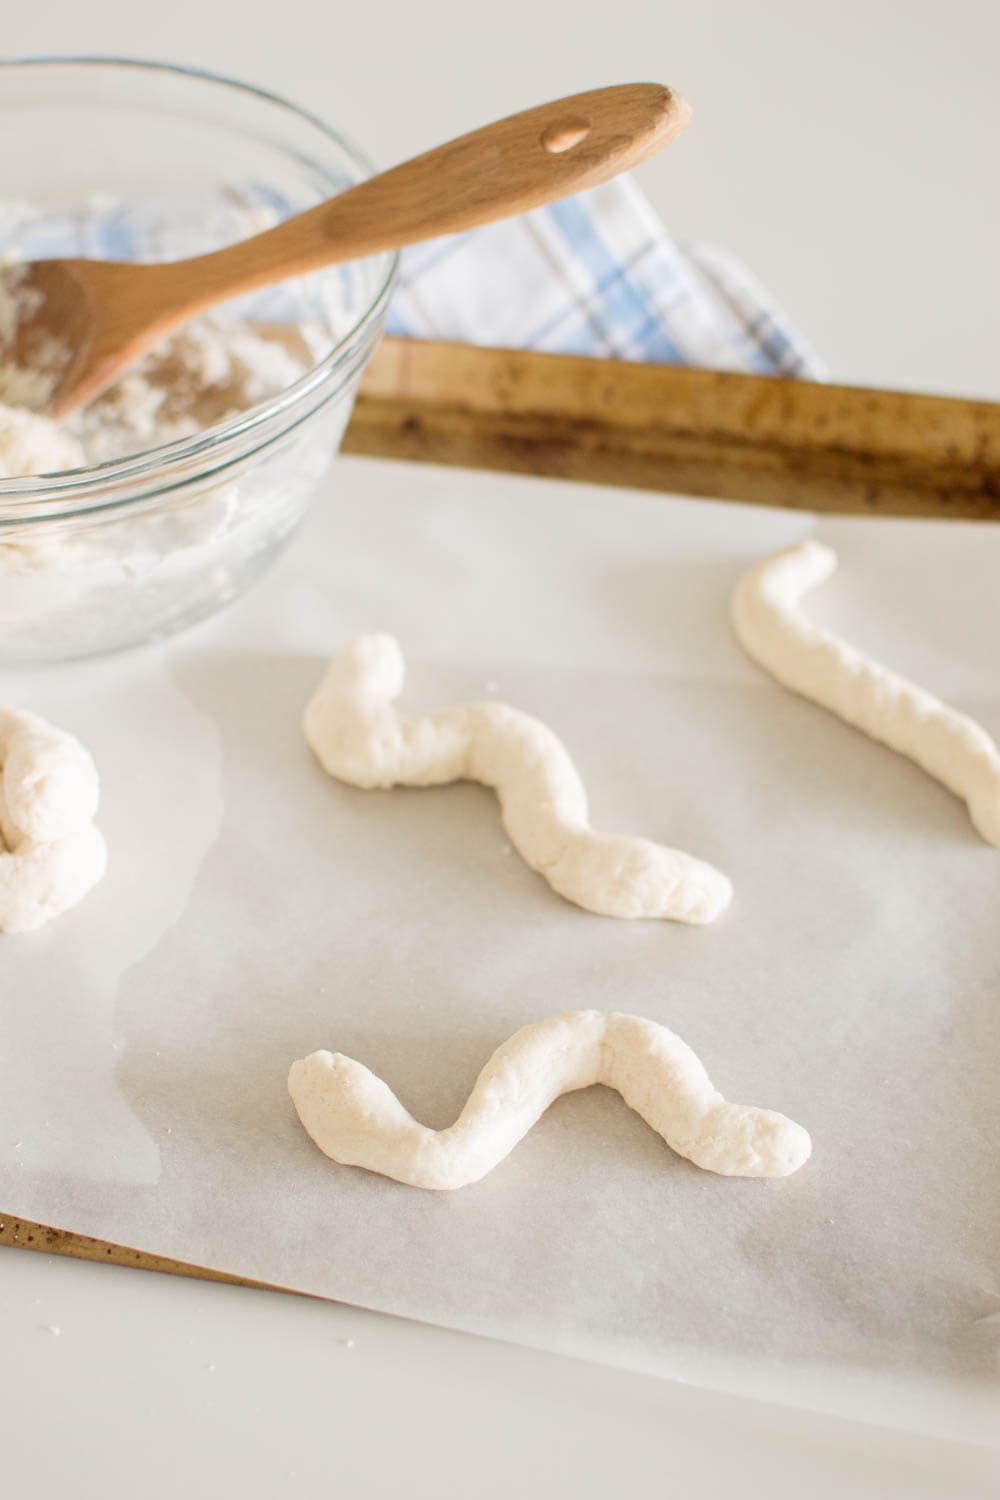 Shaping salt dough to make them look like snakes